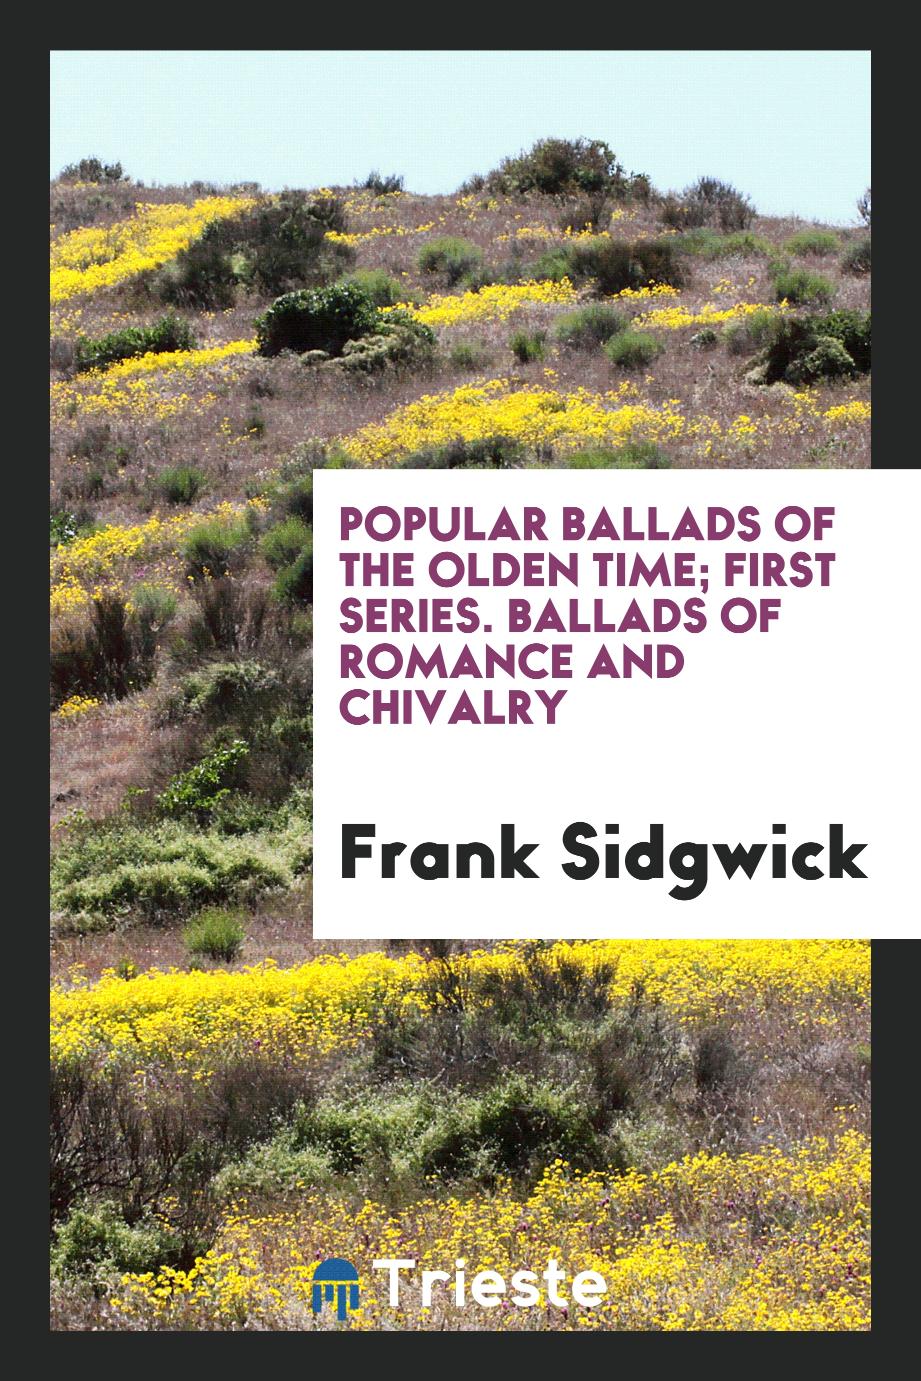 Popular ballads of the olden time; First Series. Ballads of Romance and Chivalry